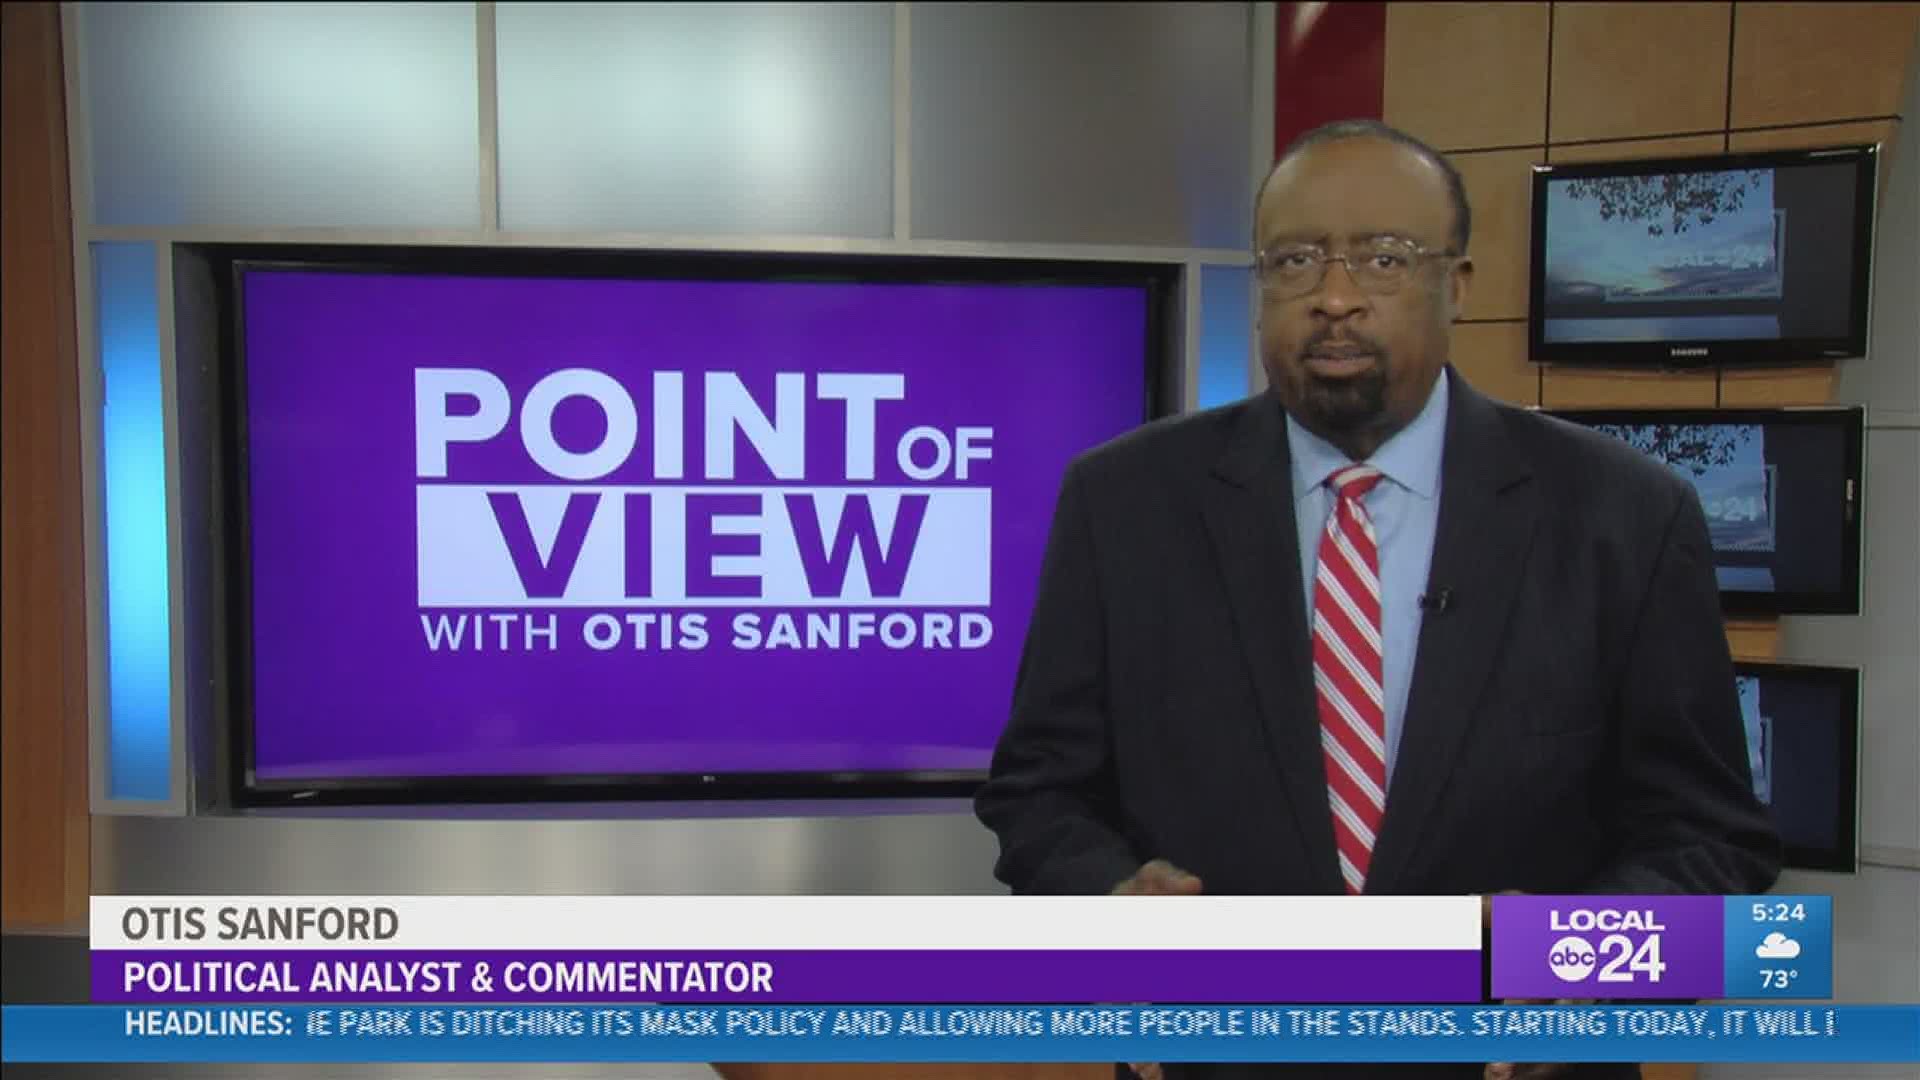 Local 24 News political analyst and commentator Otis Sanford shares his point of view on getting back to a sense of normalcy in the Mid-South amid the pandemic.